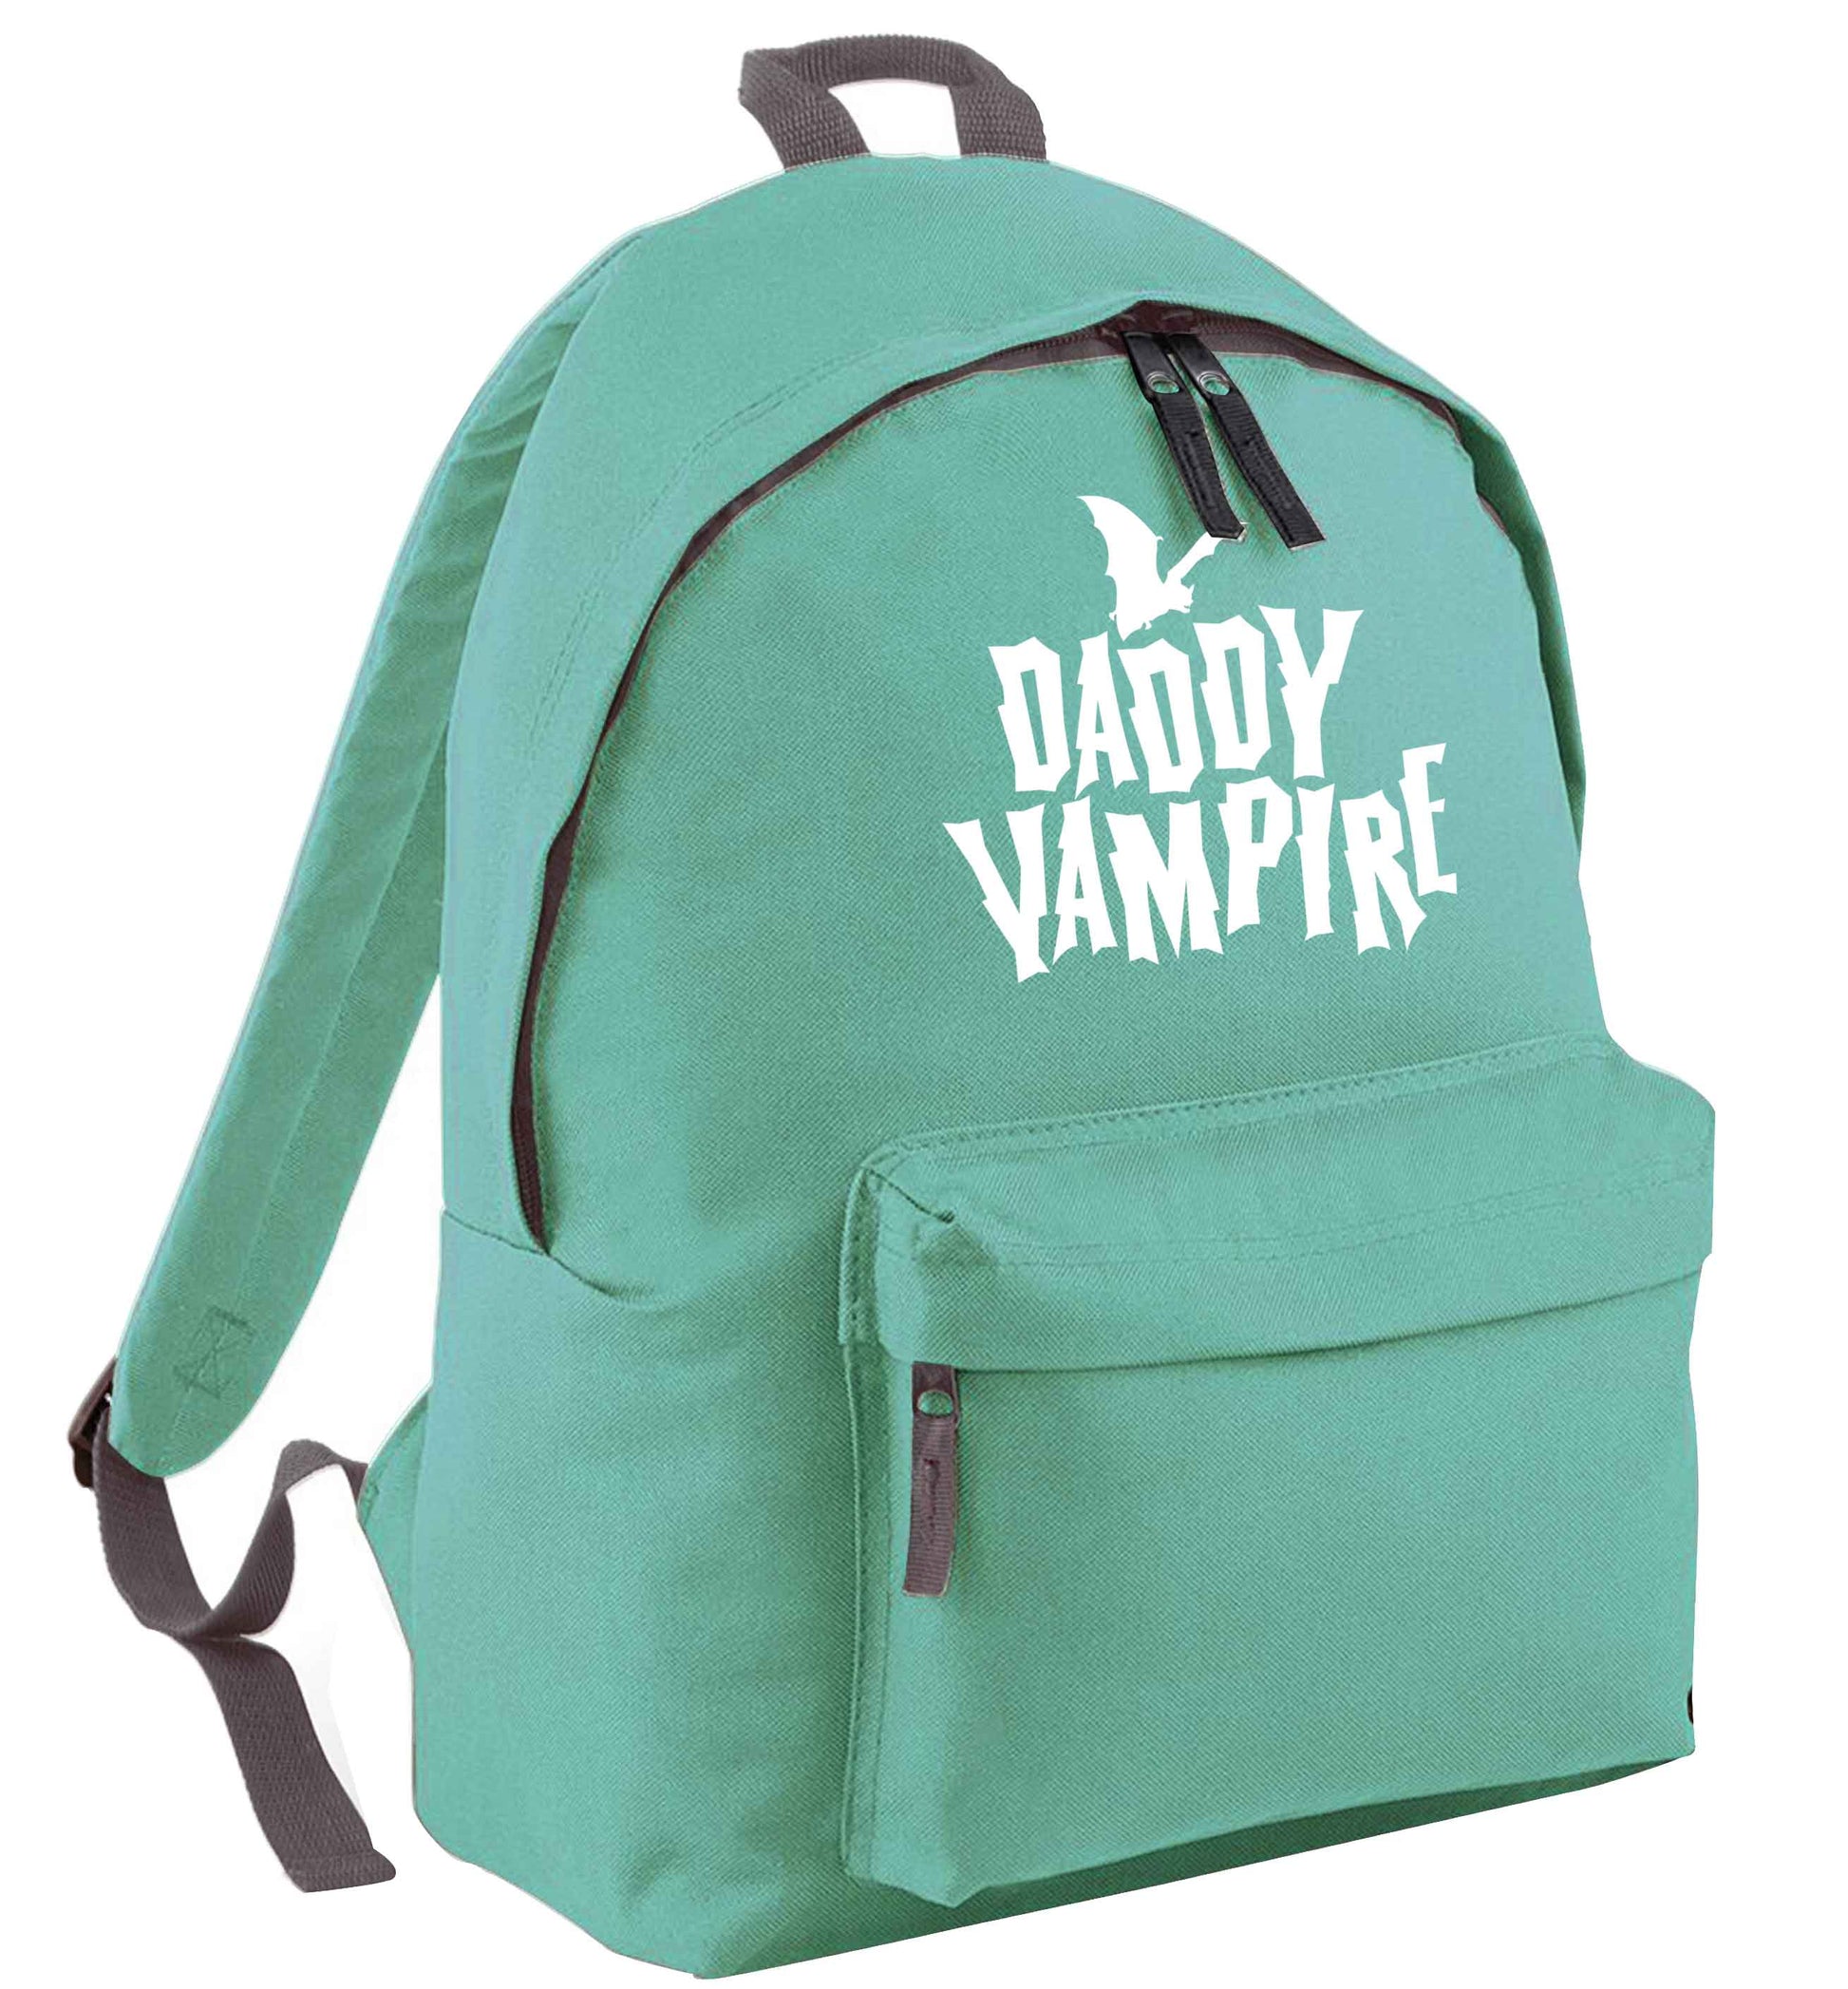 Daddy vampire mint adults backpack